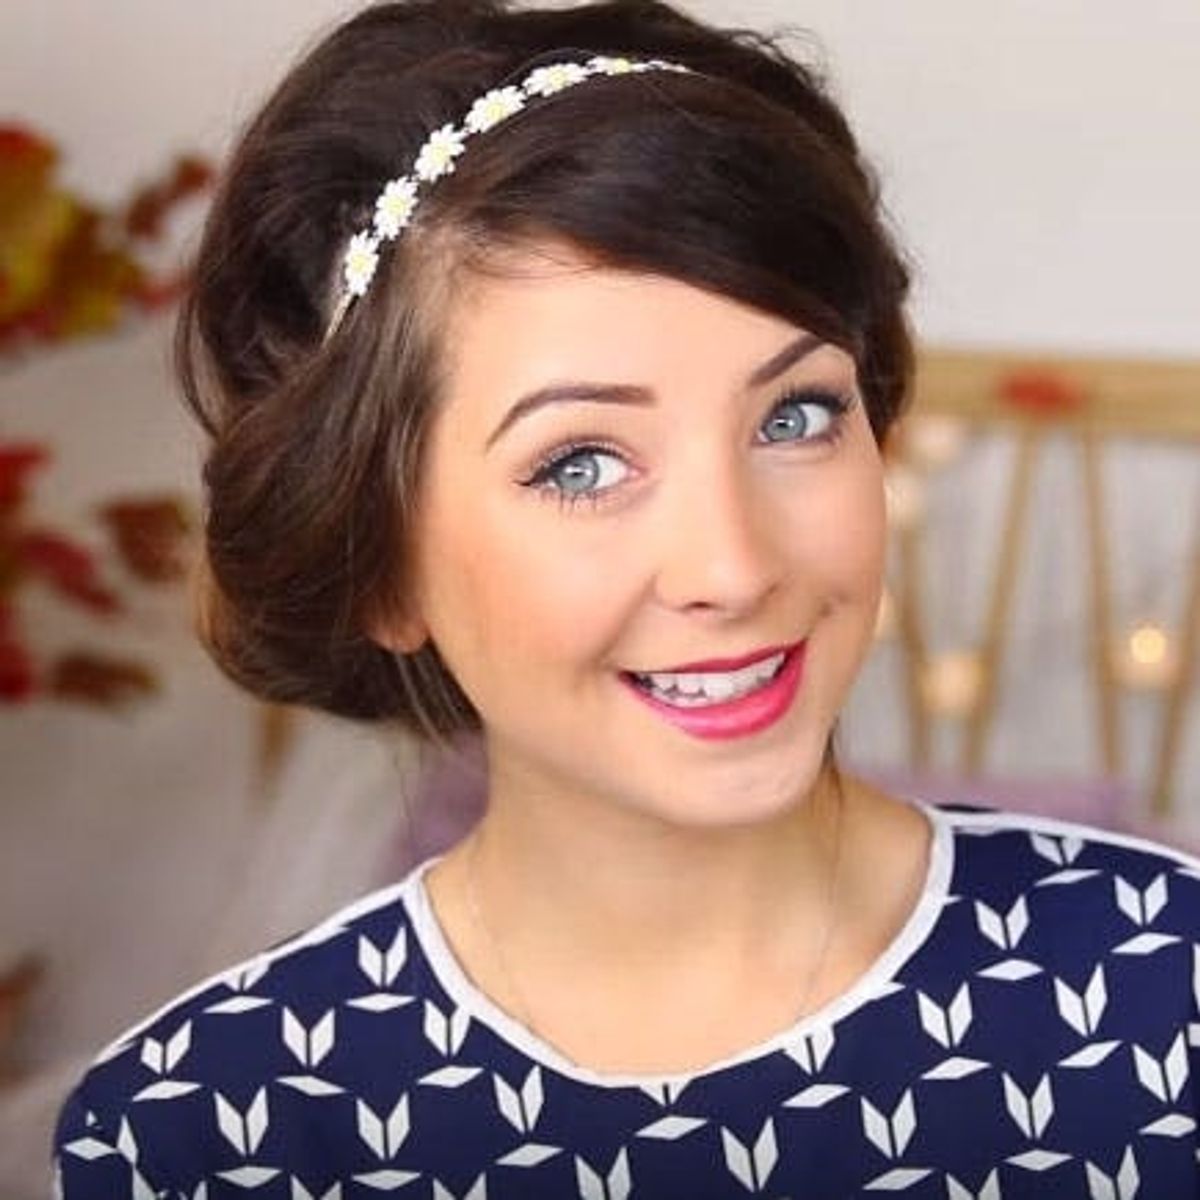 10 Easy Back-to-School Hair Tutorial Videos You Need